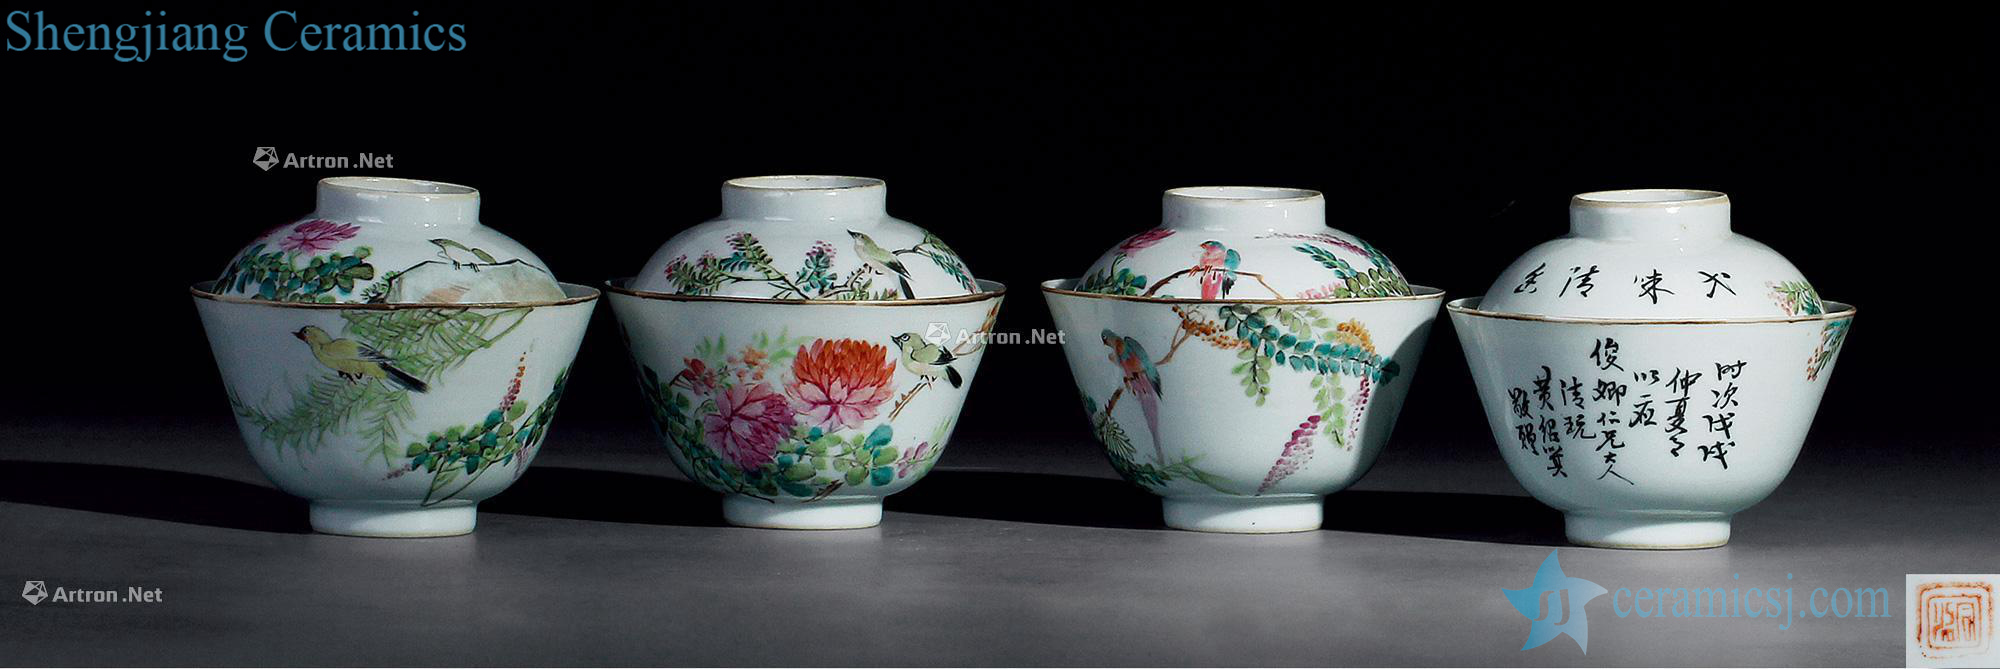 Qing guangxu Hileman basket give fostered numerous eminent people like wu changshuo Shallow purple color flower grain tureen (four pieces)